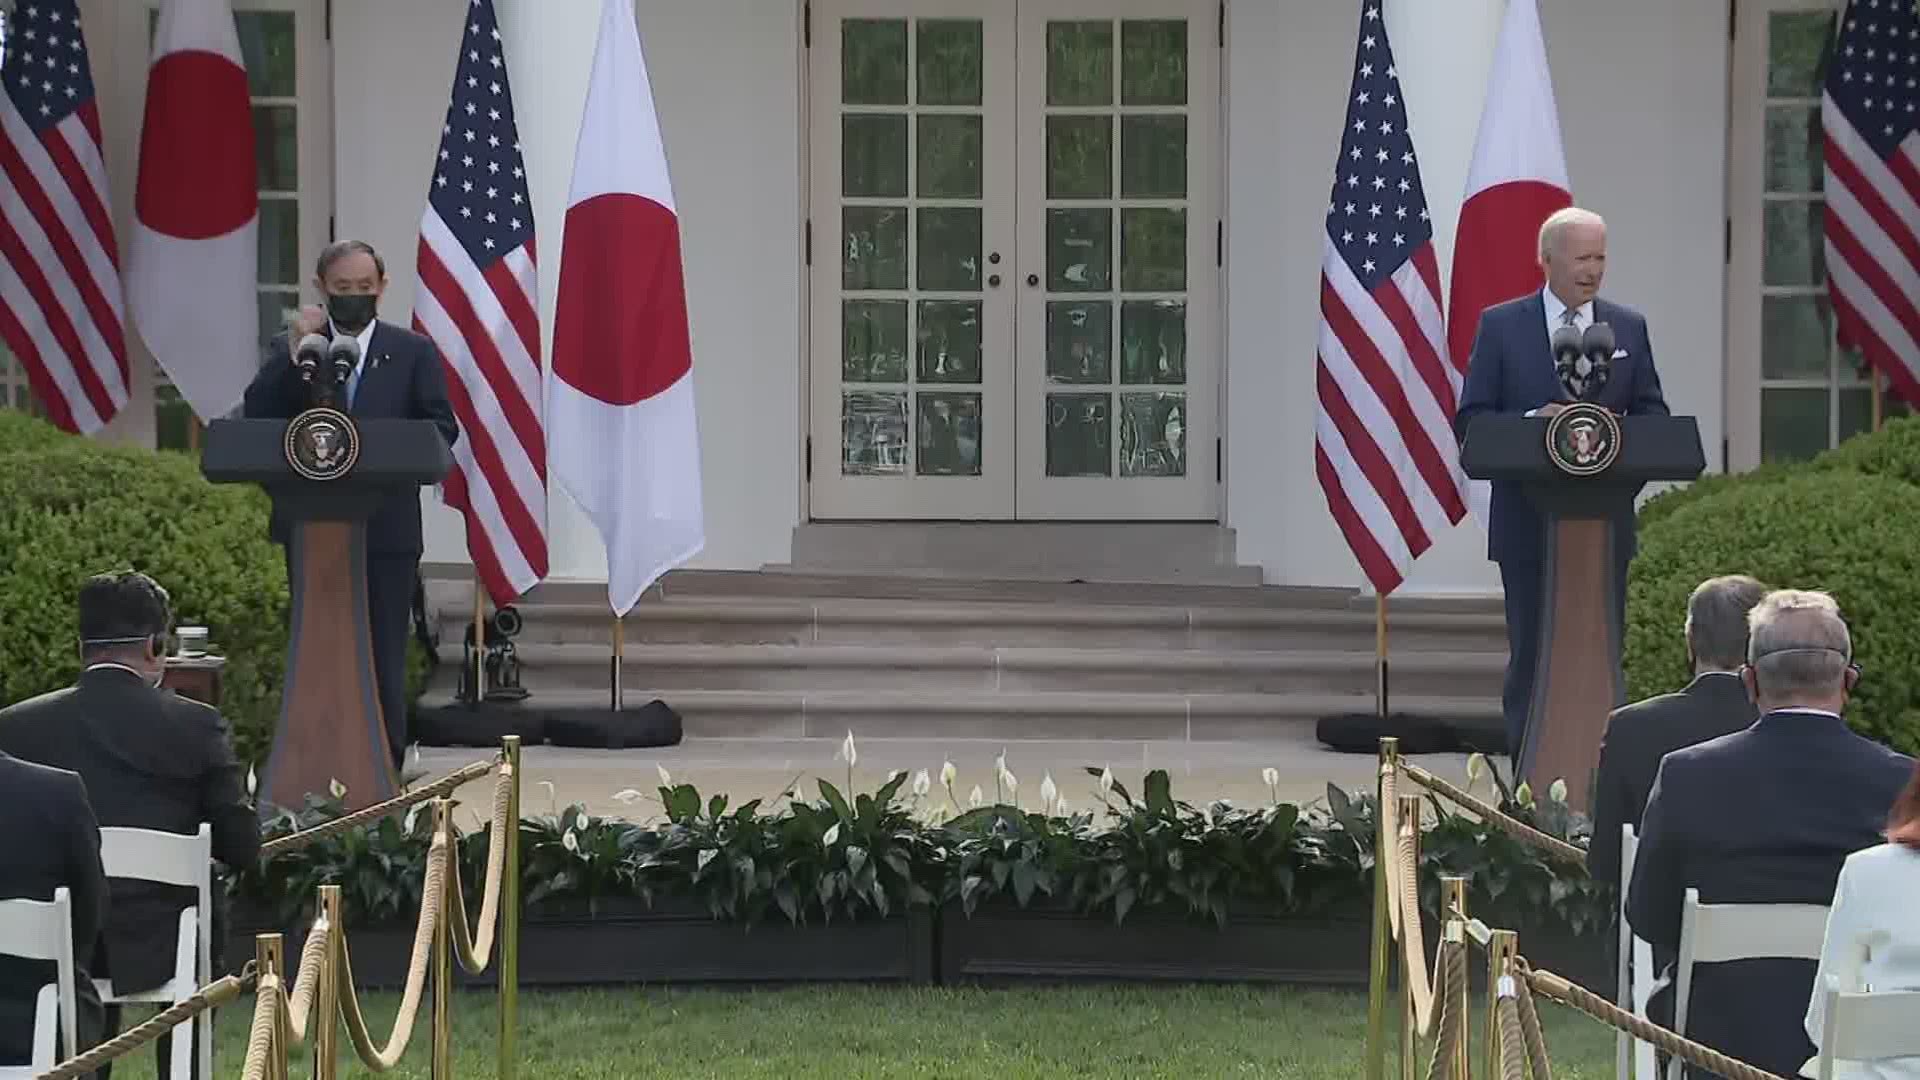 Japanese Prime Minister Yoshihide Suga's visit on Friday was Biden’s first face-to-face talks with a foreign leader as president.